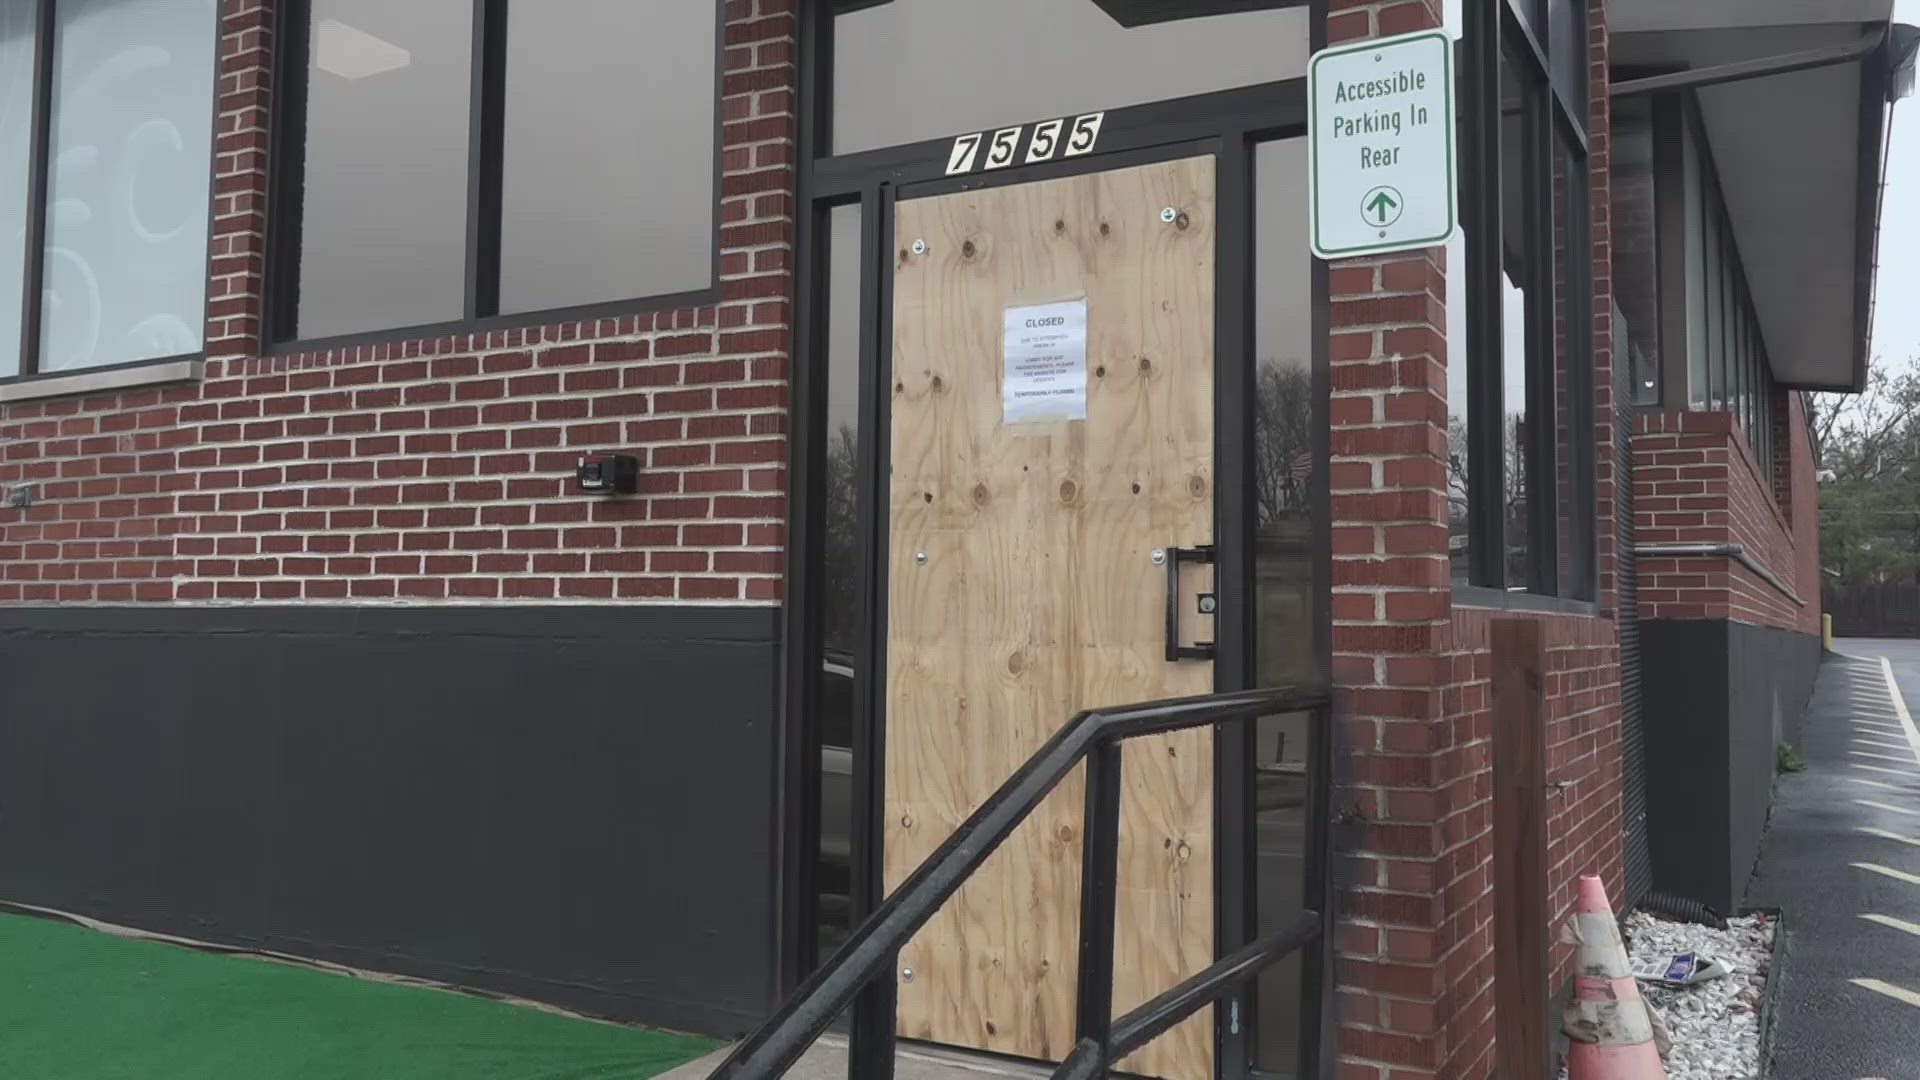 The burglars didn't get away with anything but the dispensary was closed until the state cleared them to reopen.